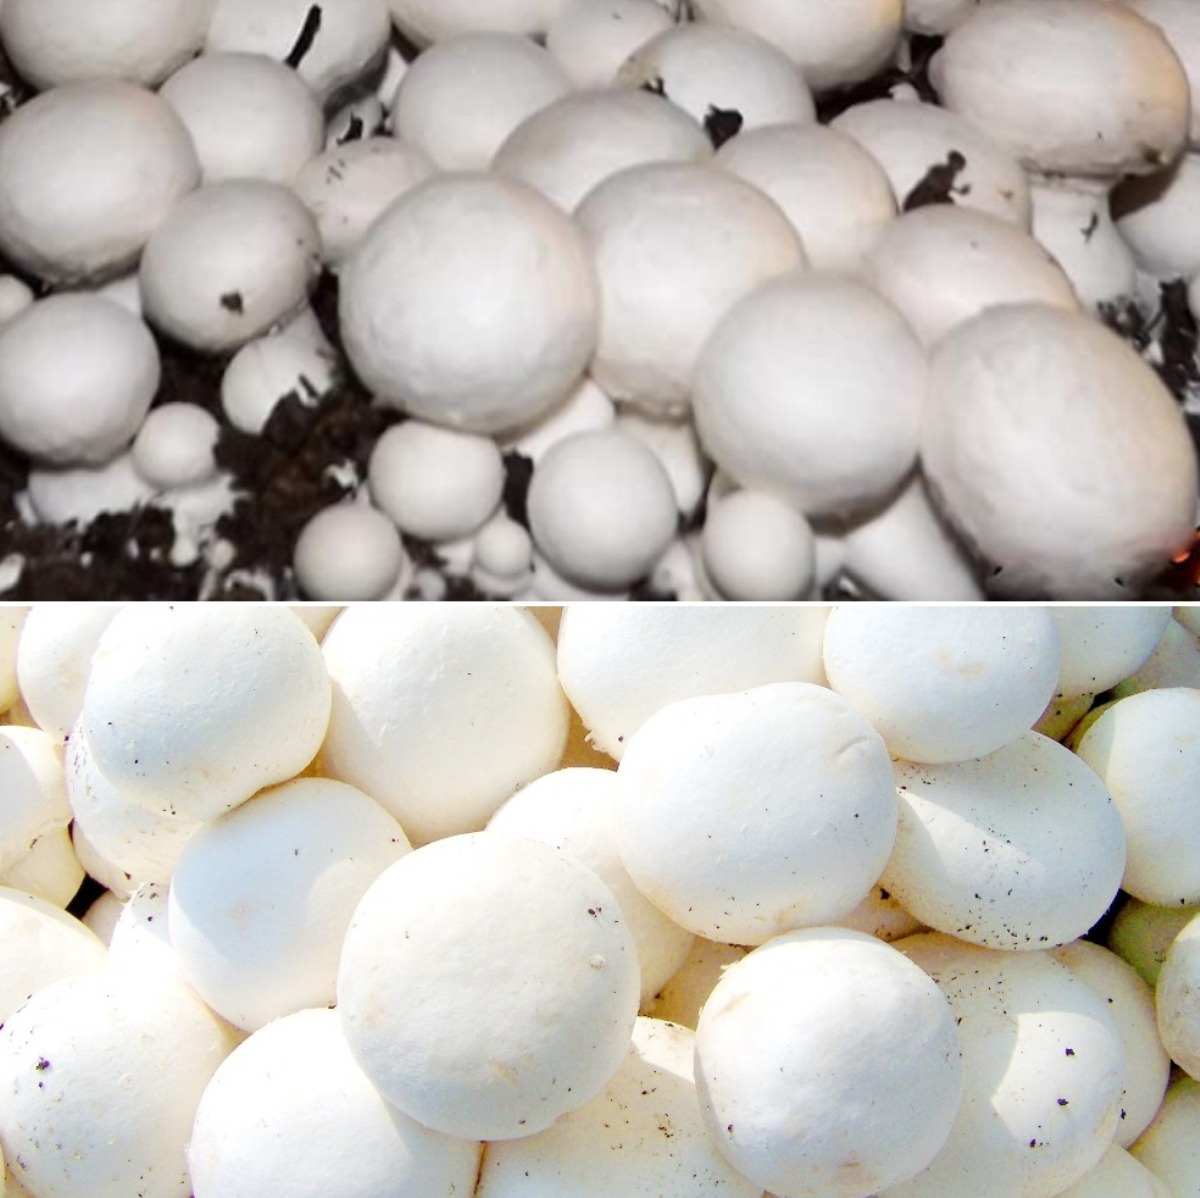 Requirements for growing Button mushrooms.